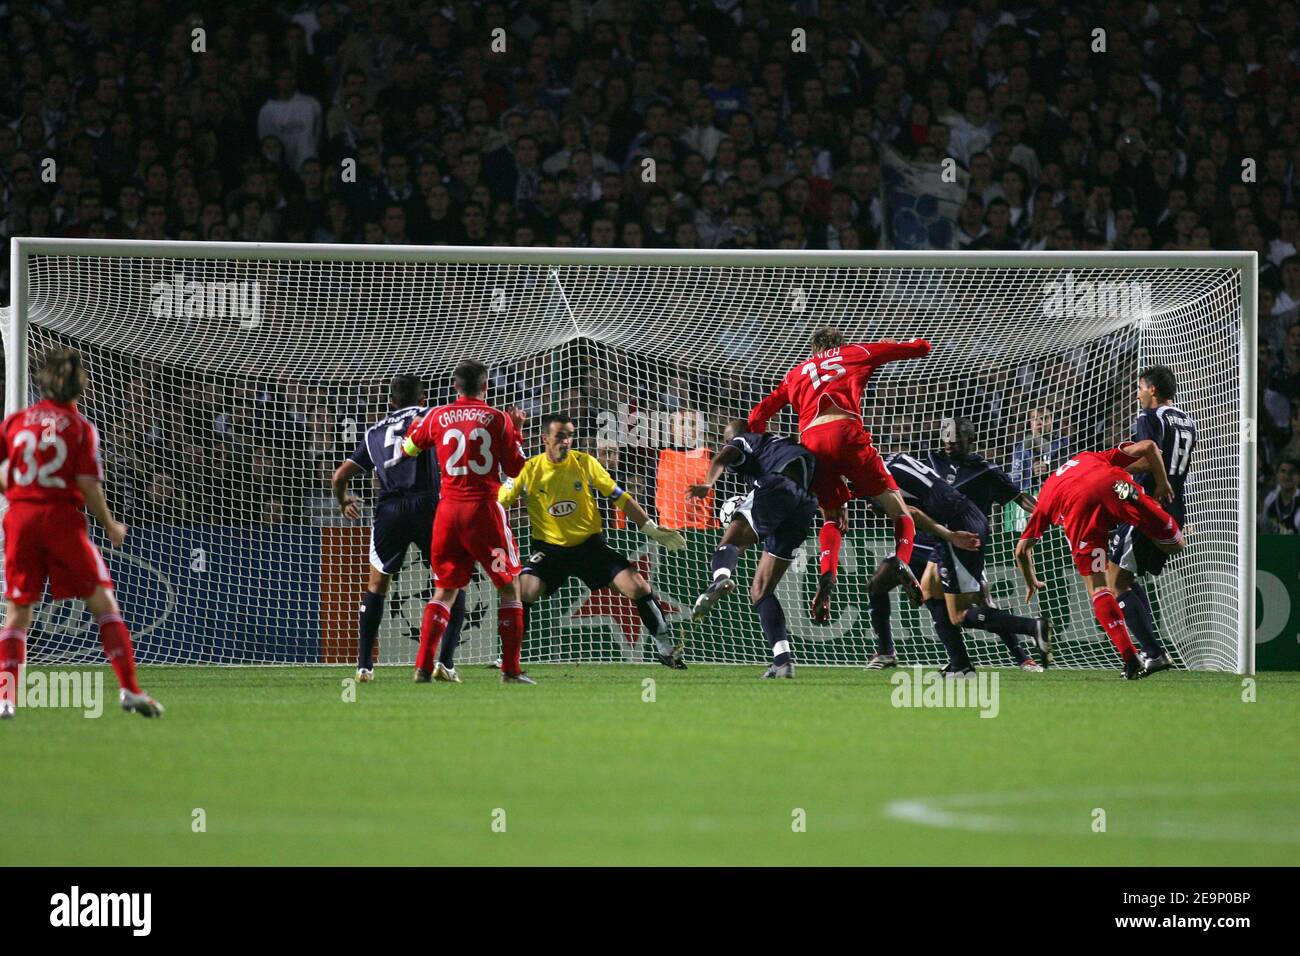 Liverpool's Peter Crouch scores with a header during the Champions League group C match, FC Girondins De Bordeaux vs Liverpool FC, at Chaban-Delmas Stadium in Bordeaux, France, on October 18, 2006. Liverpool won 1-0. Photo by Manuel Blondeau/Cameleon/ABACAPRESS.COM Stock Photo